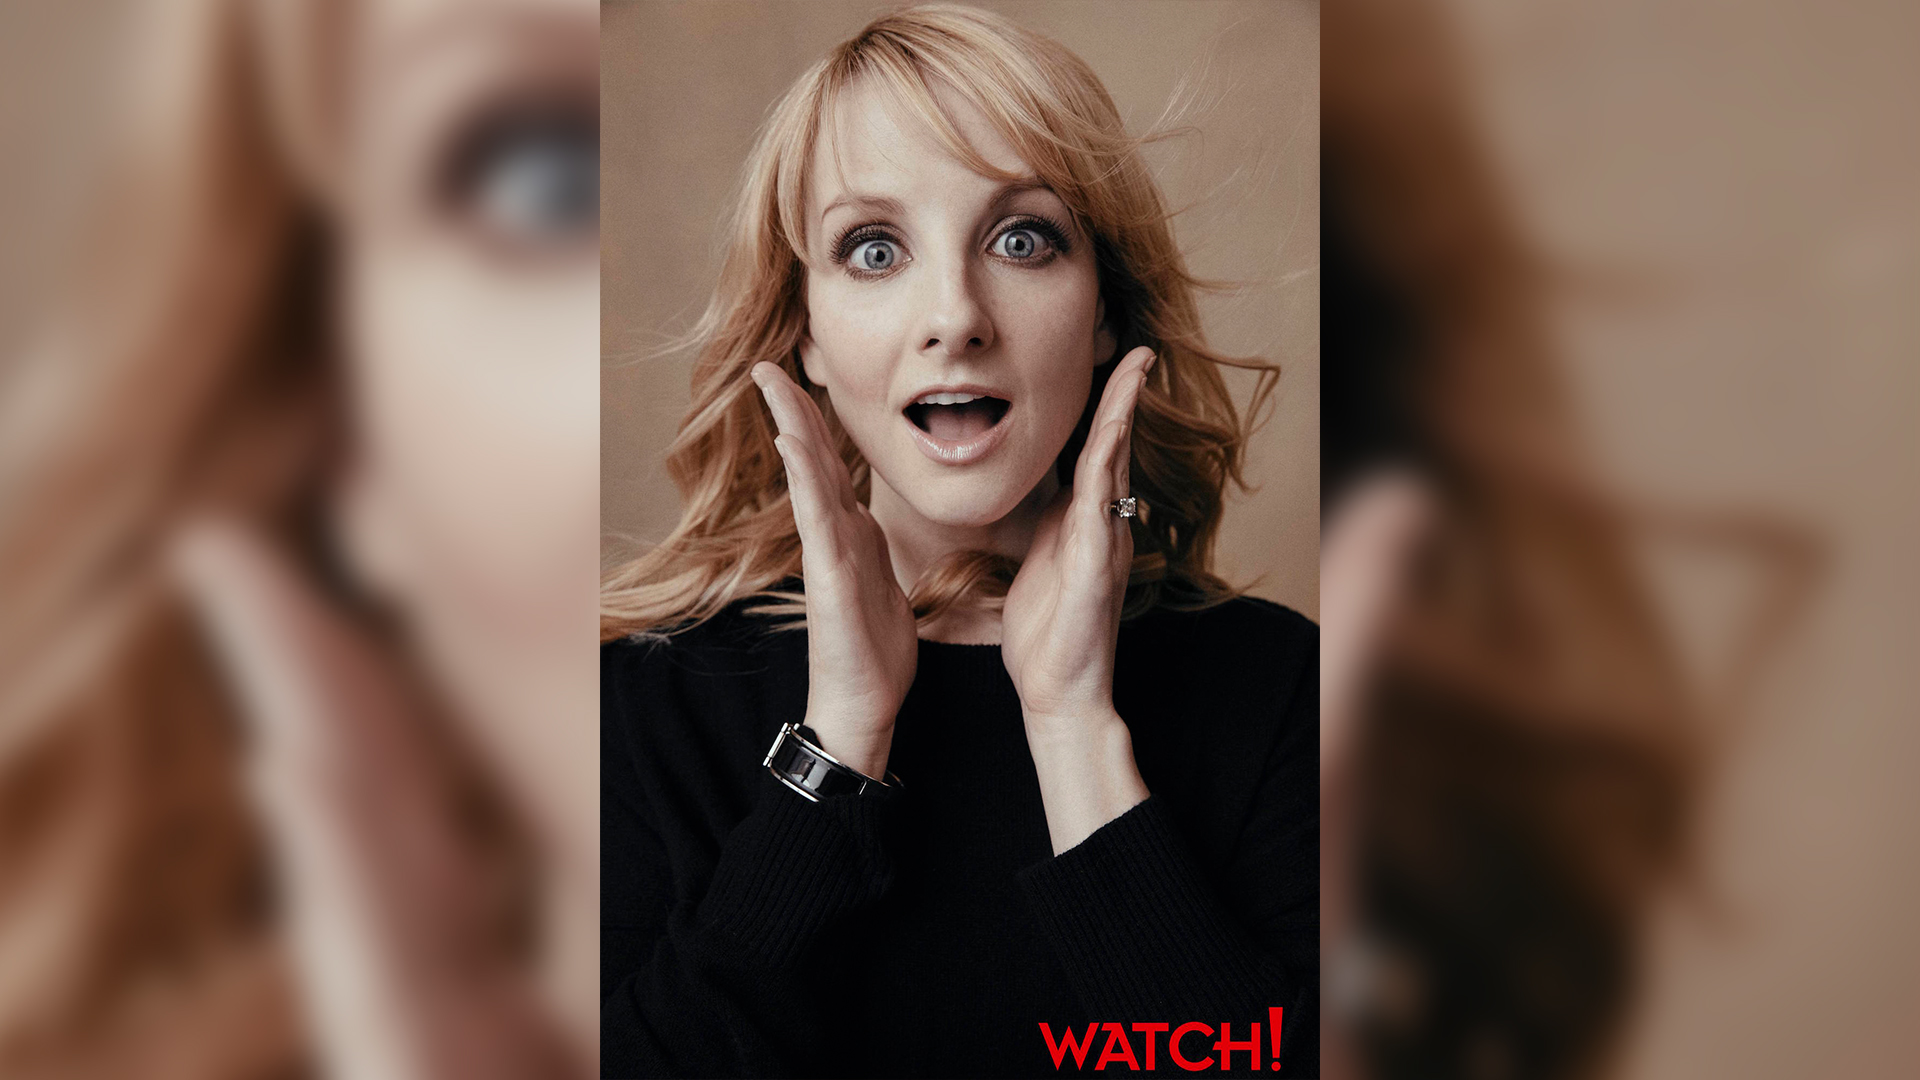 This exquisite photo of Melissa Rauch is eye-opening